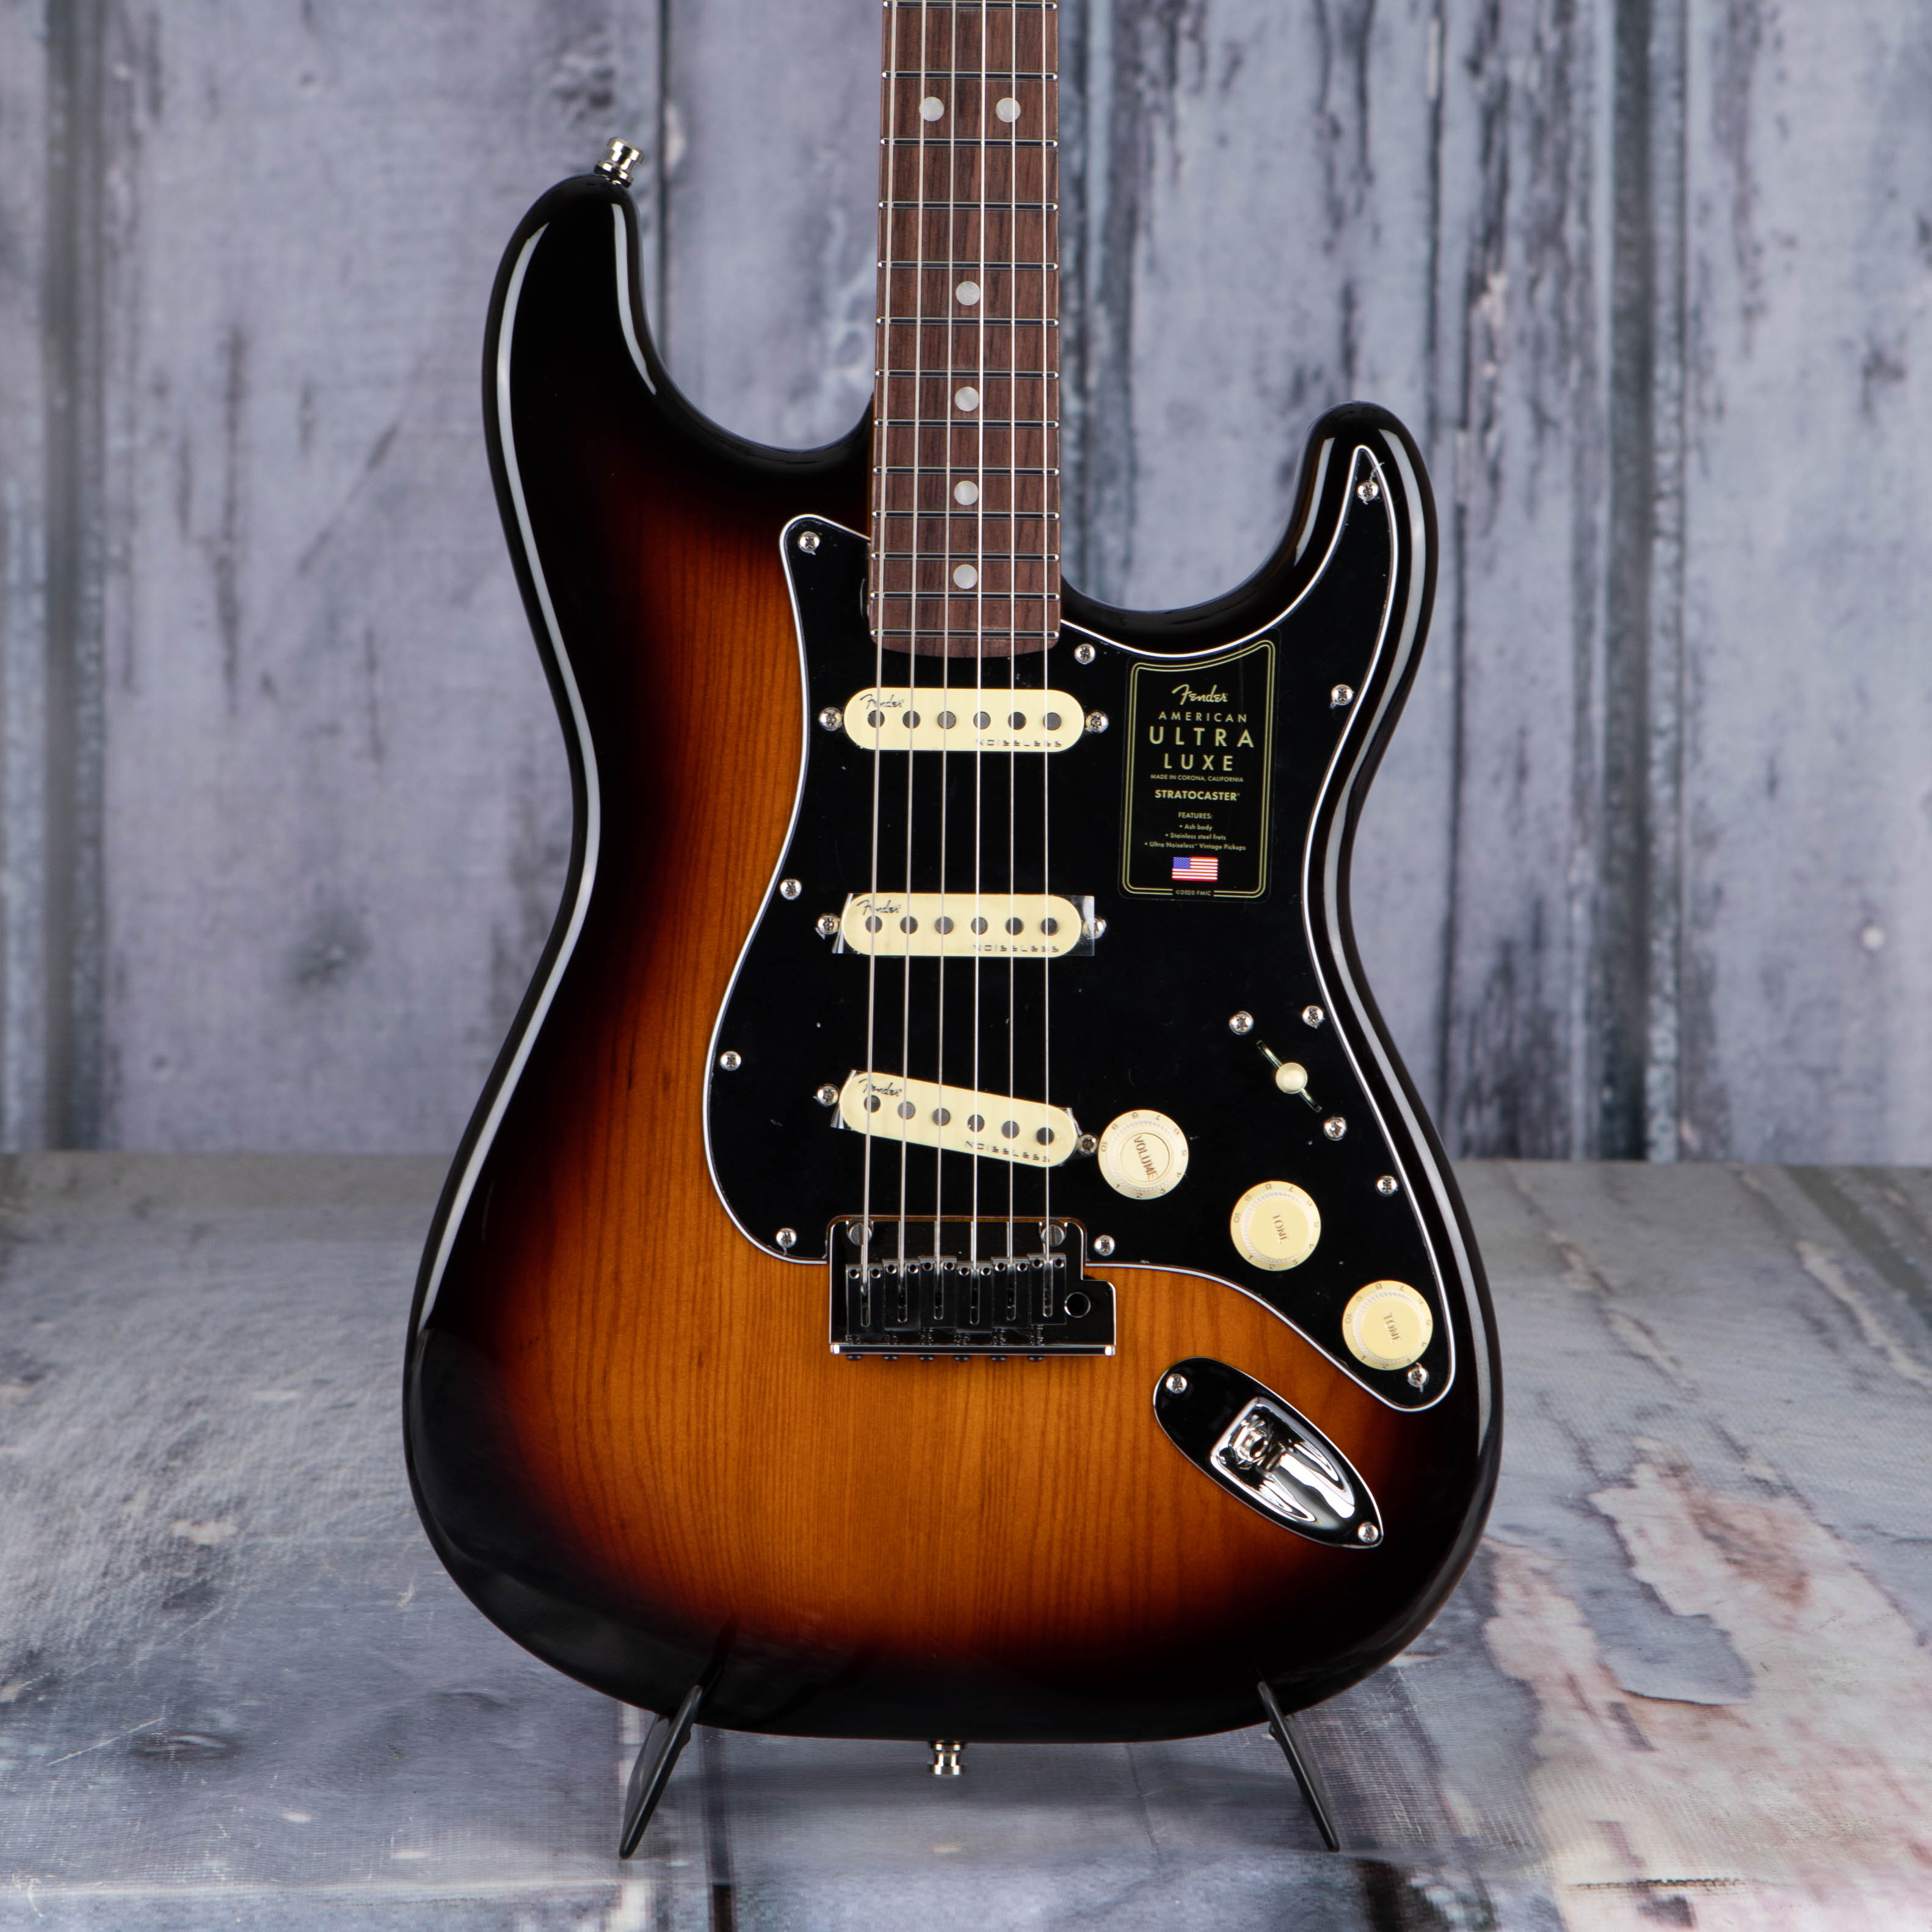 Fender American Ultra Luxe Stratocaster Electric Guitar, Rosewood Fingerboard, 2-Color Sunburst, front closeup